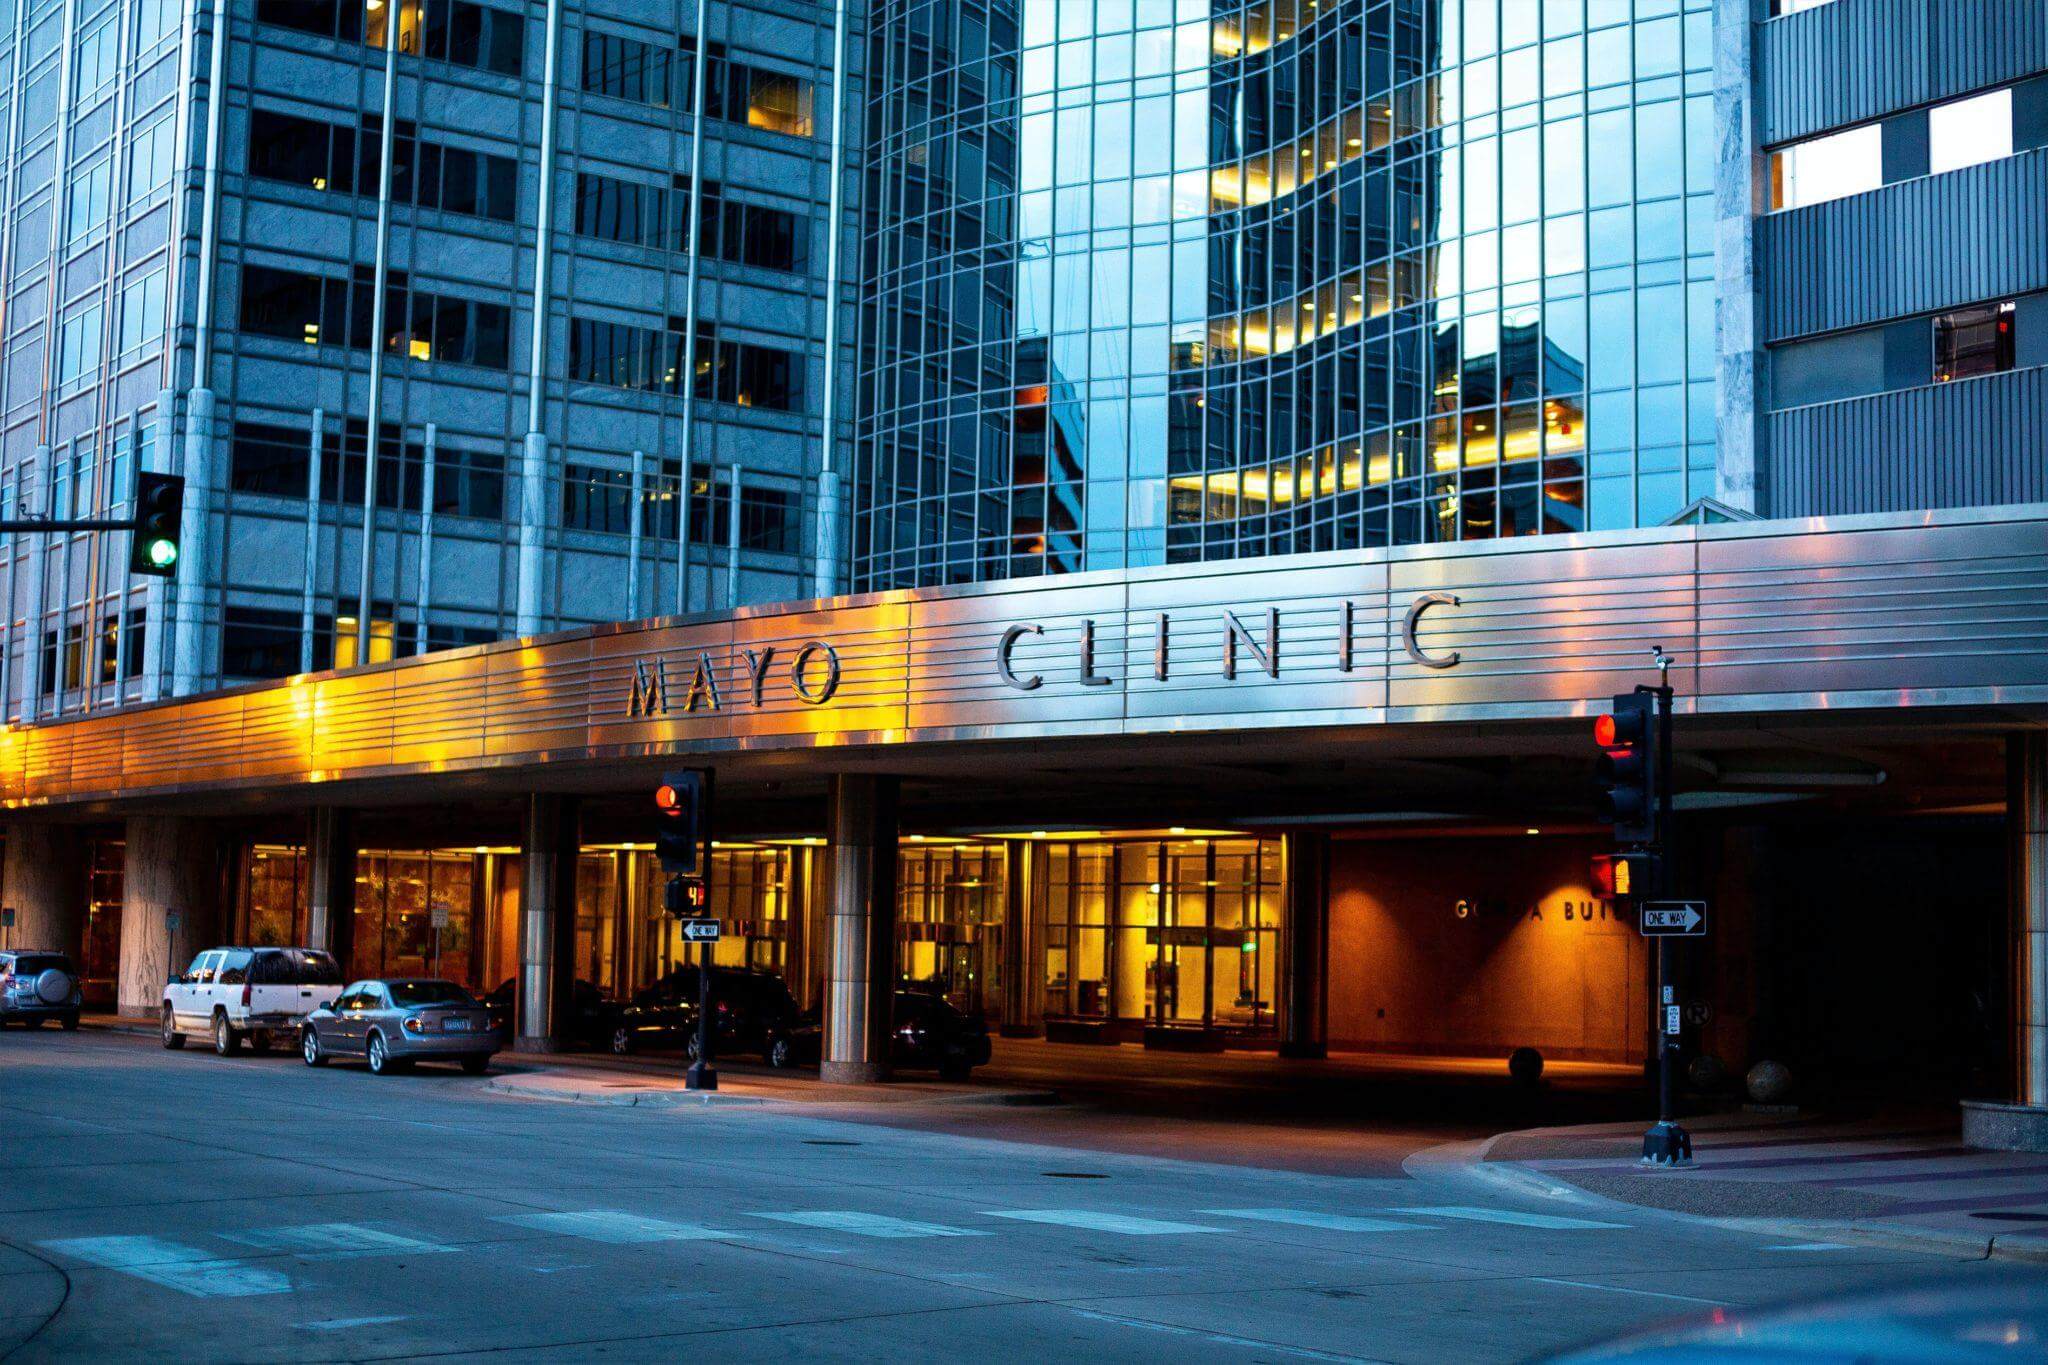 View of the Mayo Clinic building in a city.